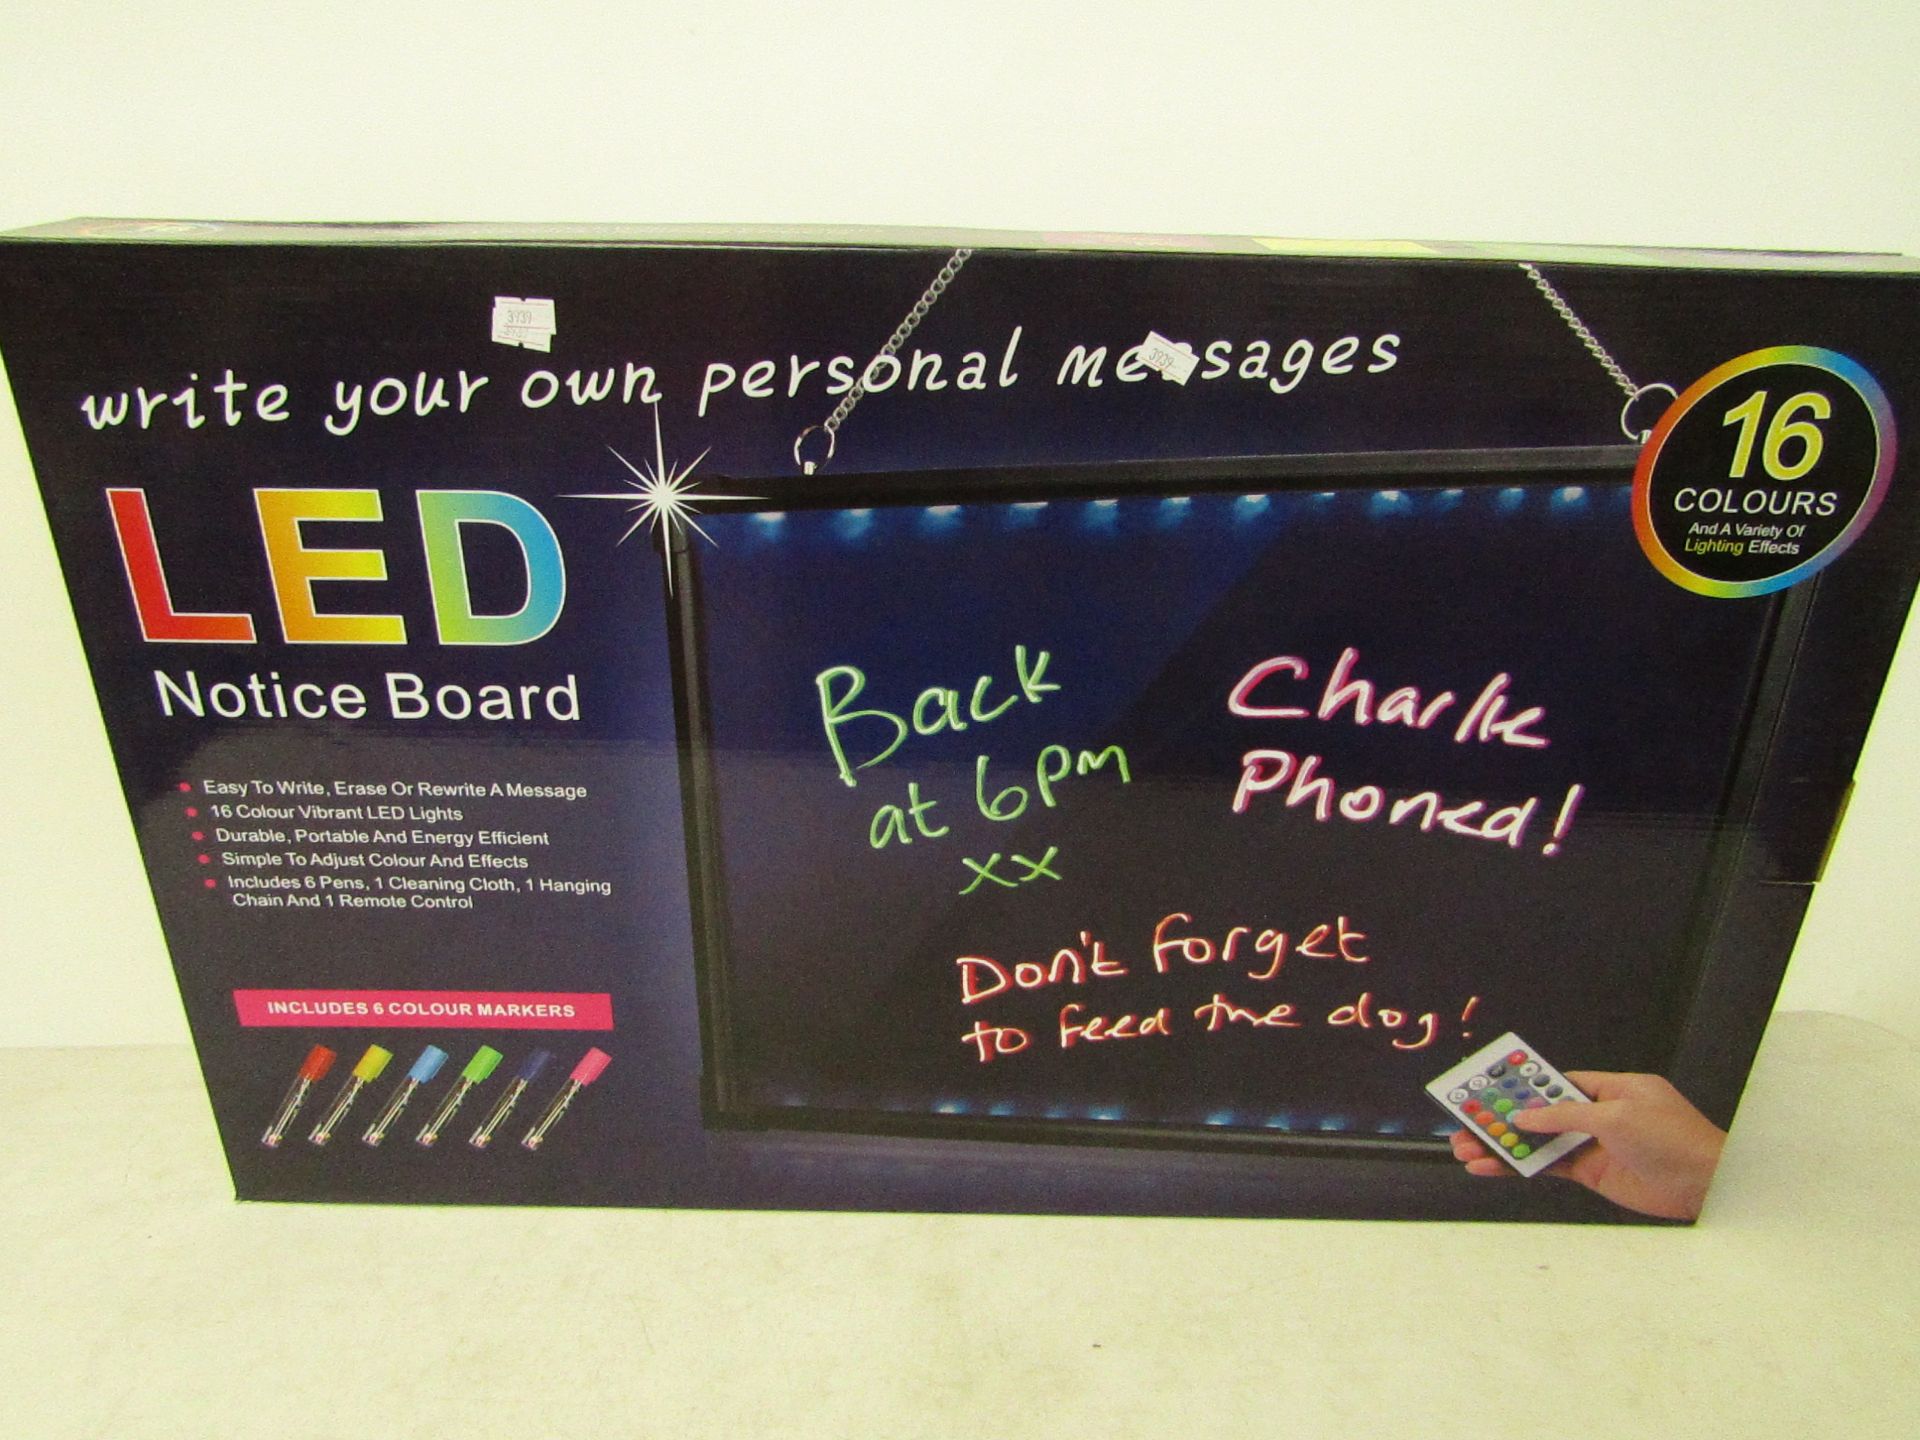 Led notice board 16 colours, new and boxed